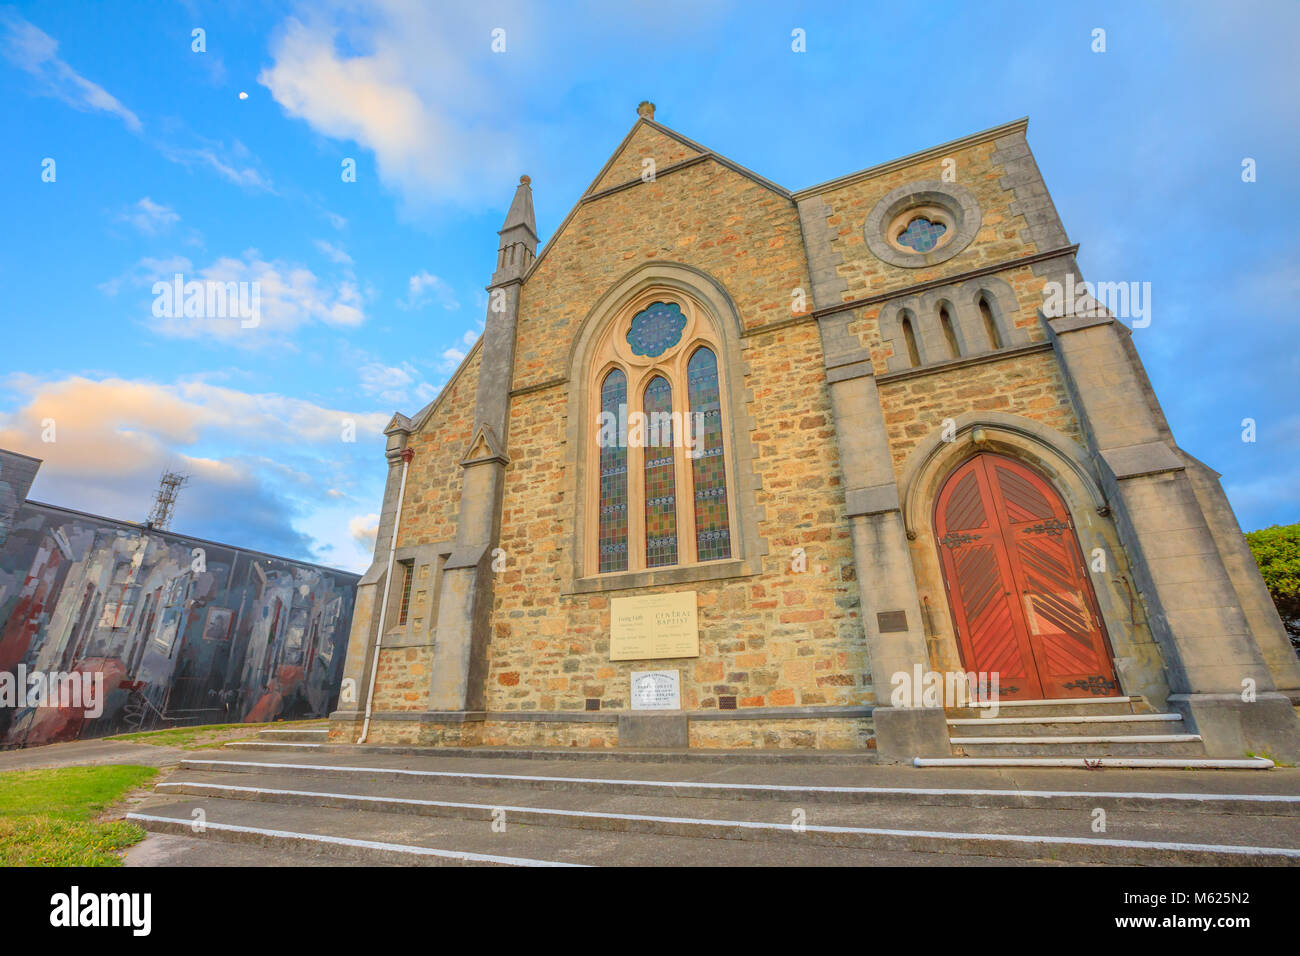 Albany, Australia - Dec 28, 2017: facade of Scots Uniting Church or Scots Presbyterian Church, in Victorian Gothic style, on York Street, Albany, Grea Stock Photo